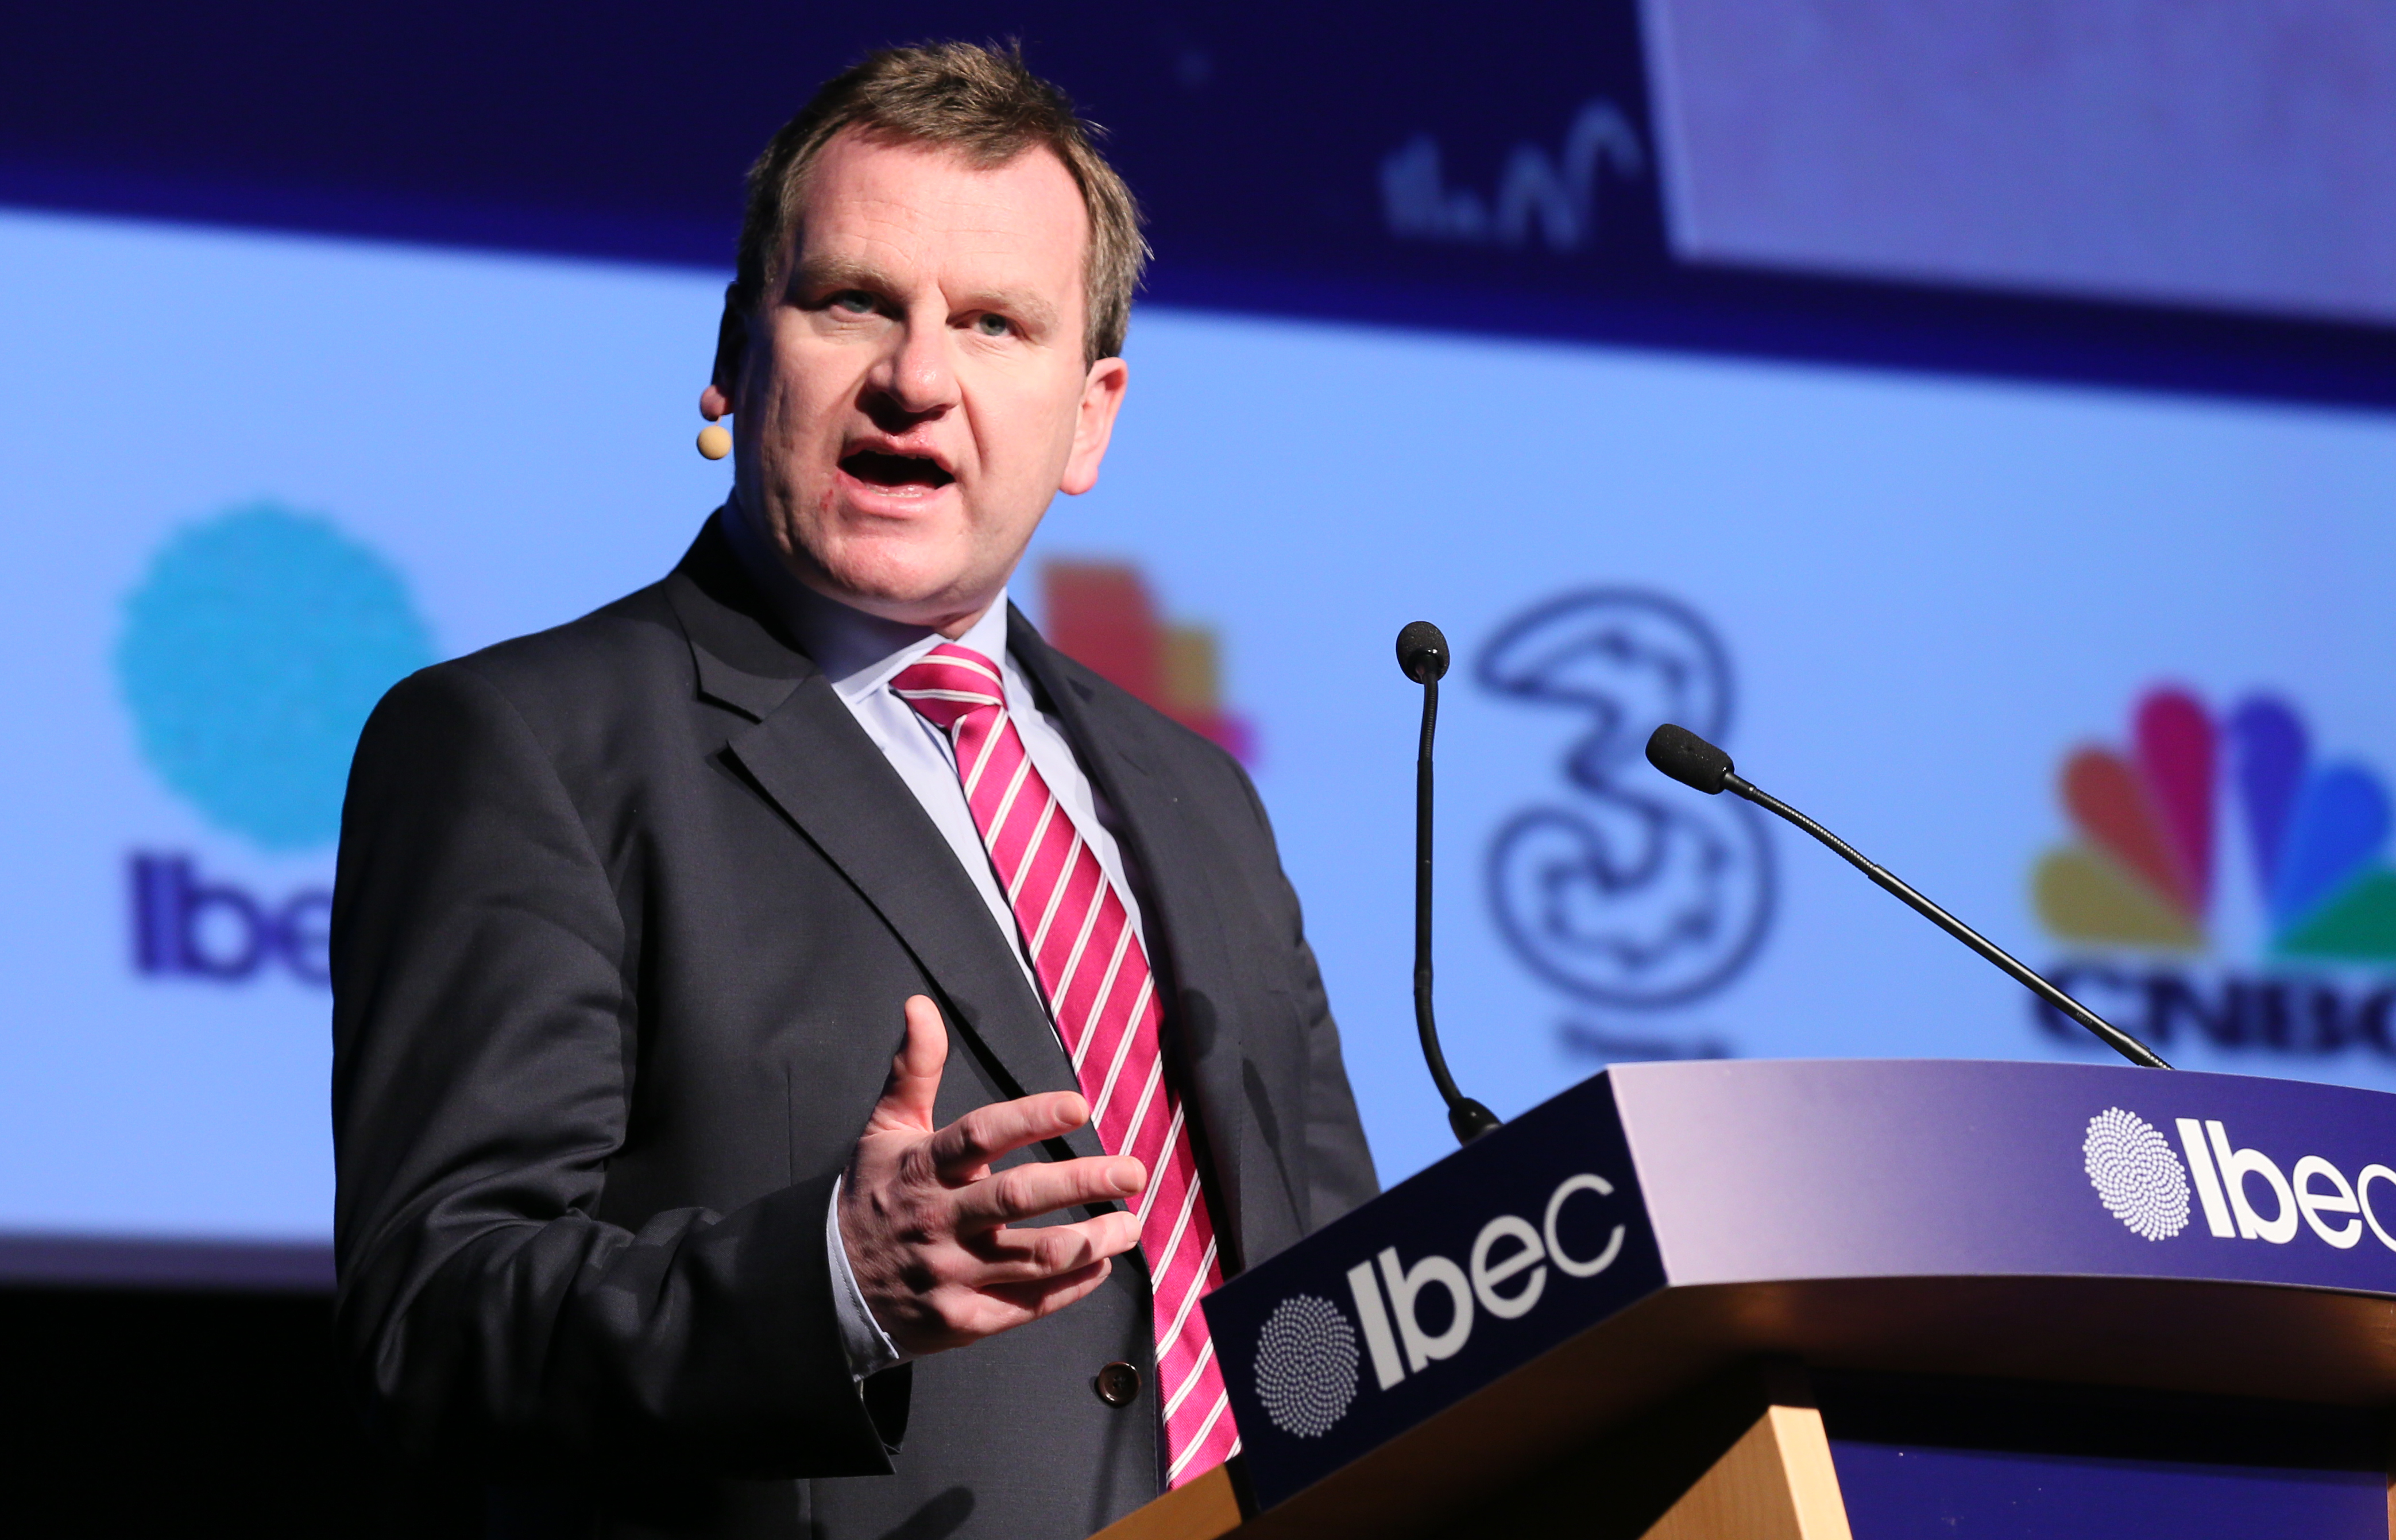 IBEC CEO Danny McCoy lent his name to a joint statment urging the formation of a new government